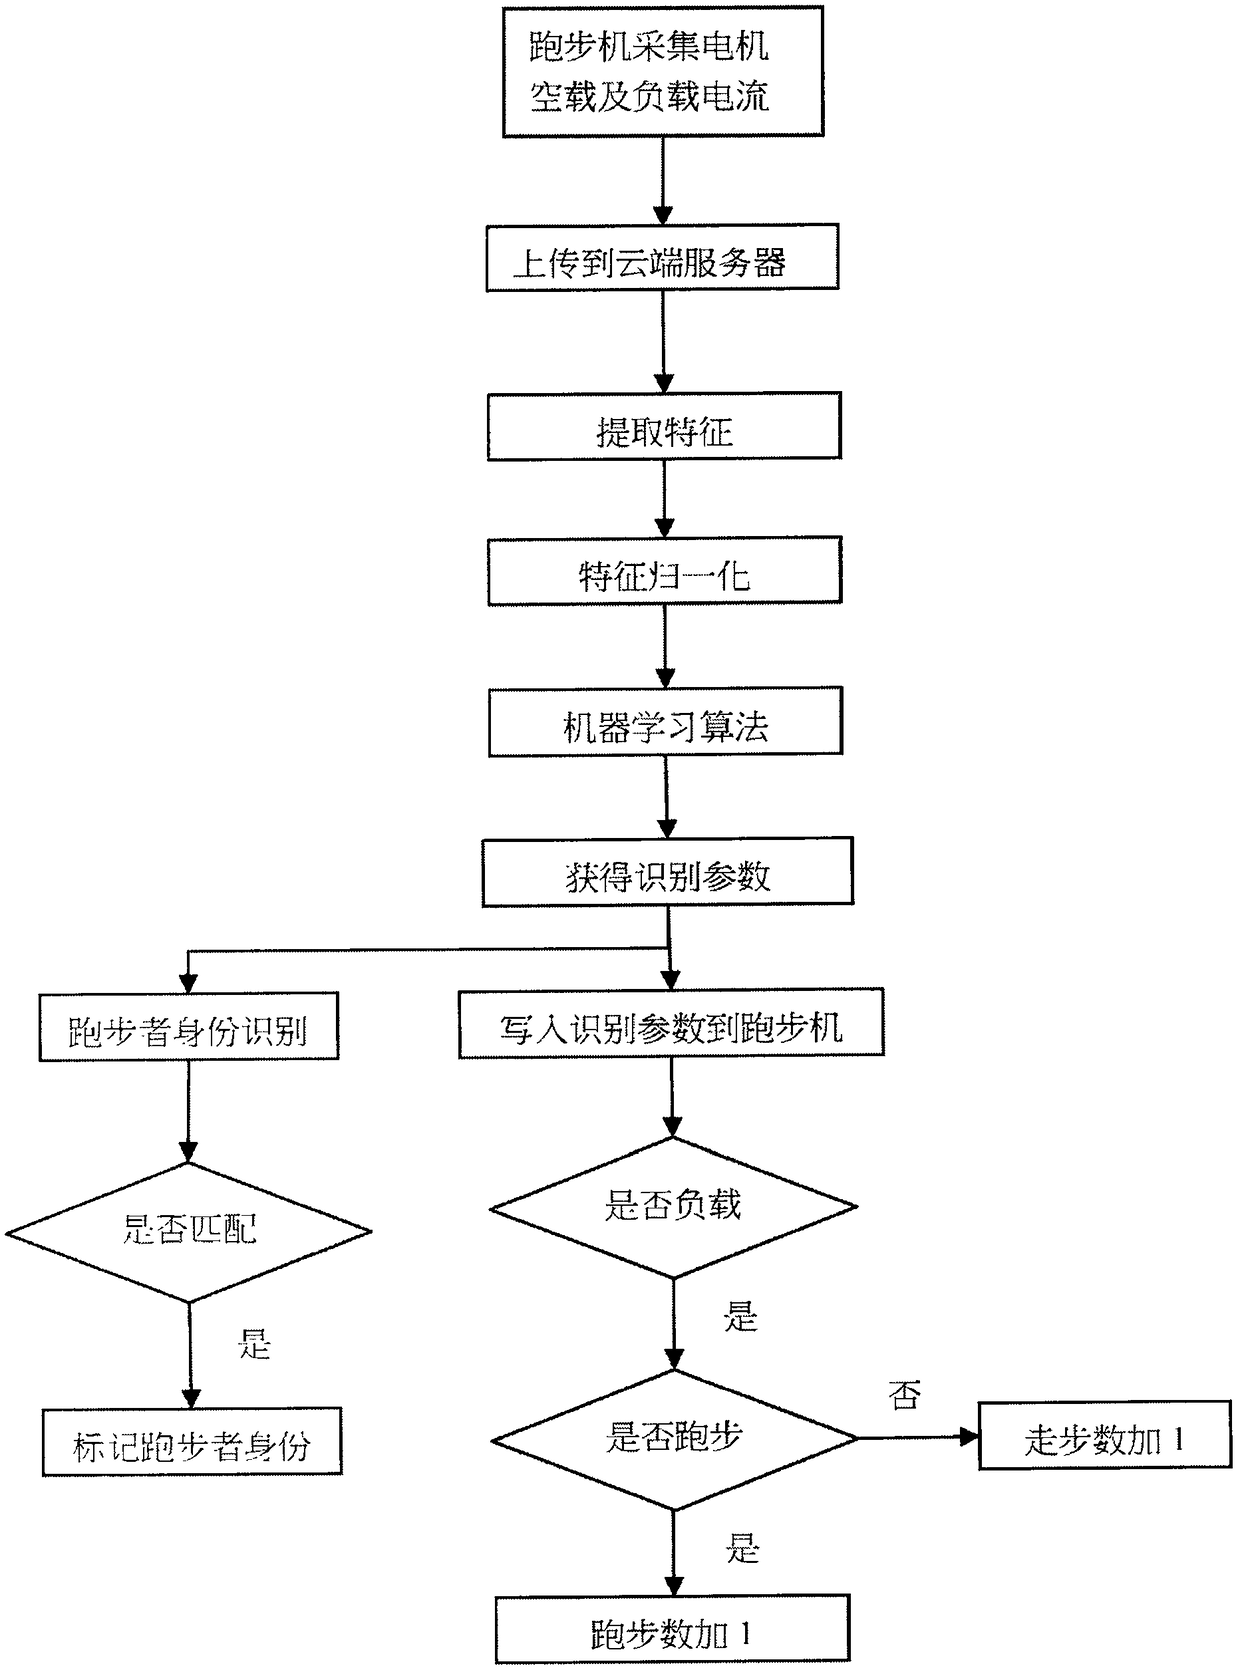 Runner identity identification and step counting method based on running machine